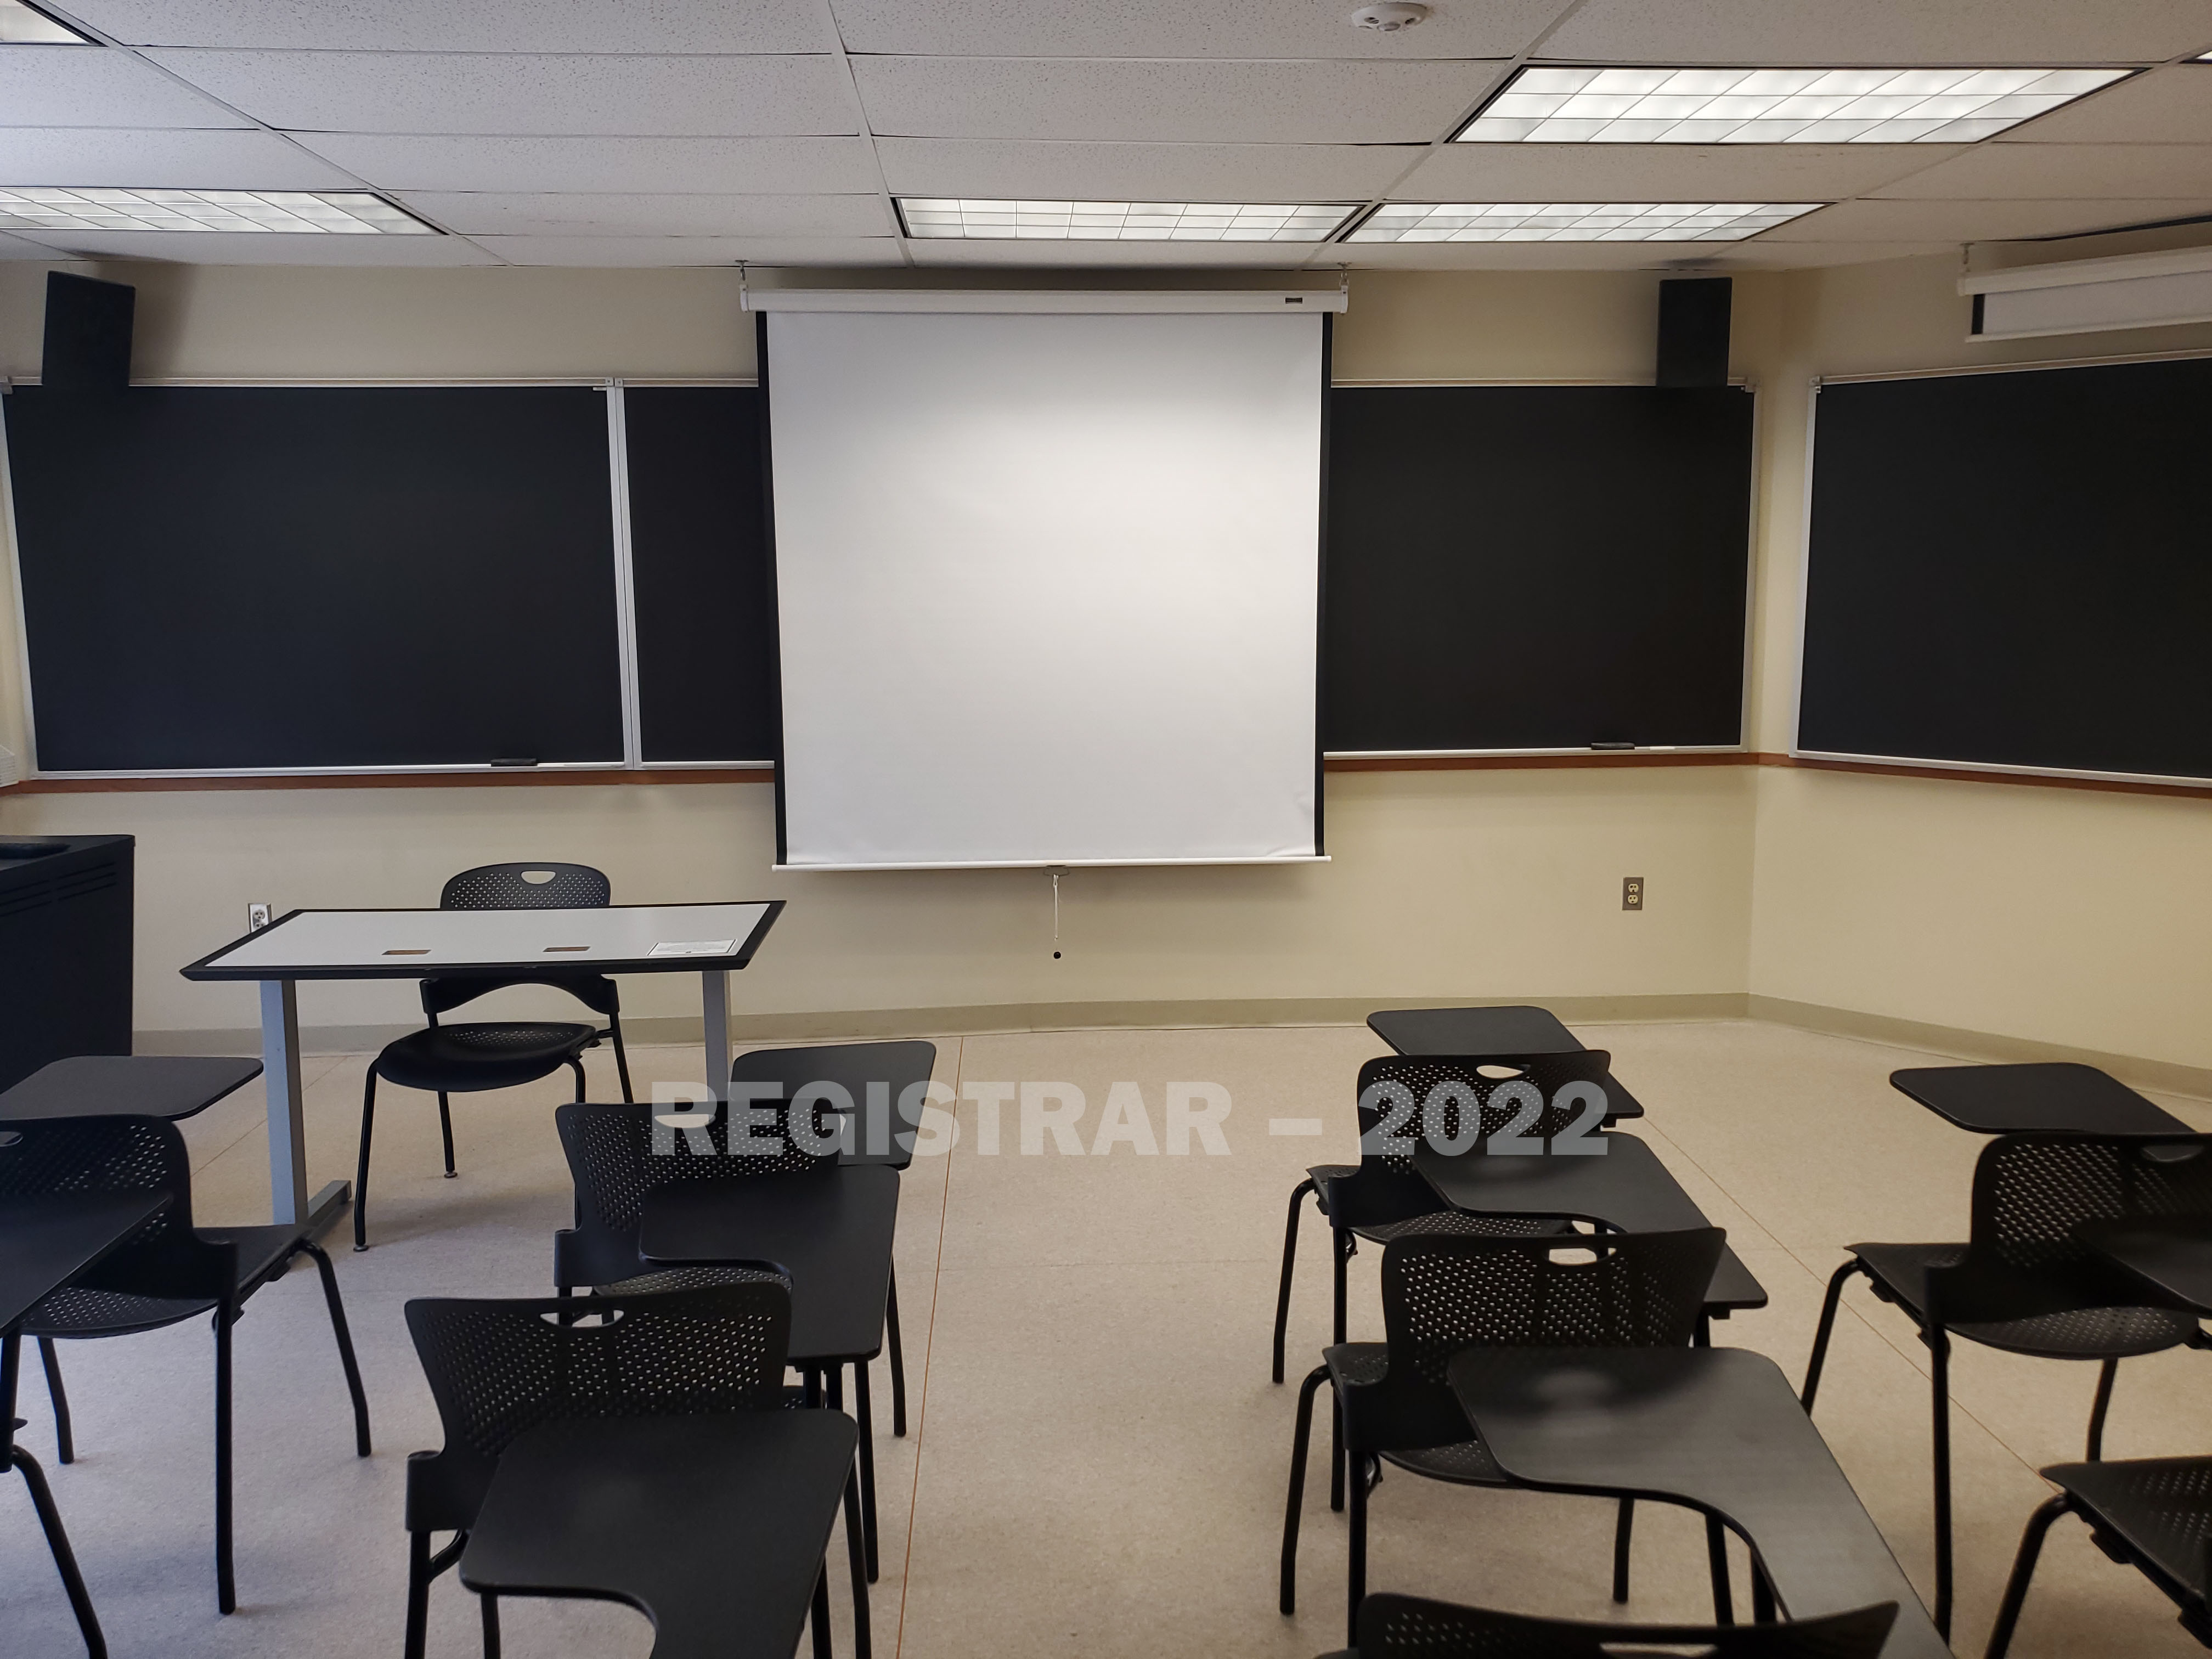 Enarson Classroom Building room 354 view from the back of the room with projector screen down